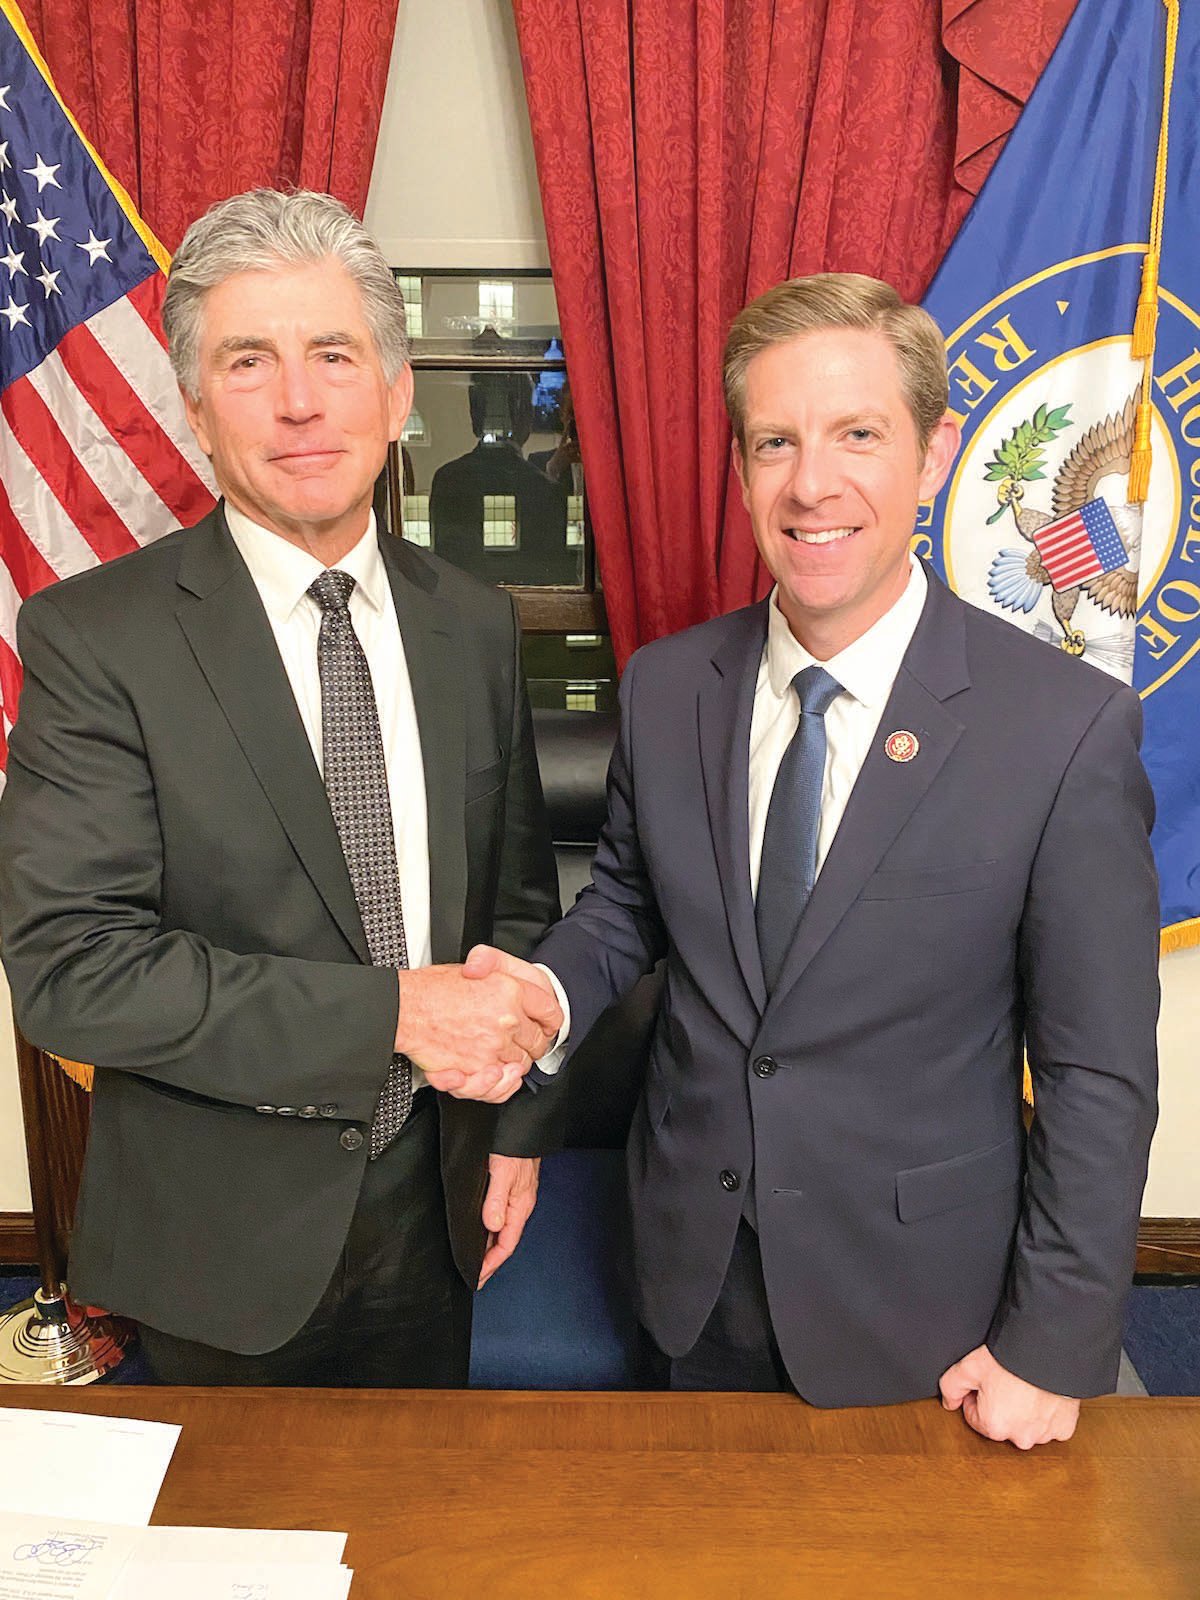 Mike Levin brought Dr. Pat Davis as his guest for President Donald Trump's State of the Union address. Davis lost three members of his family in a bluff collapse on an Encinitas beach.